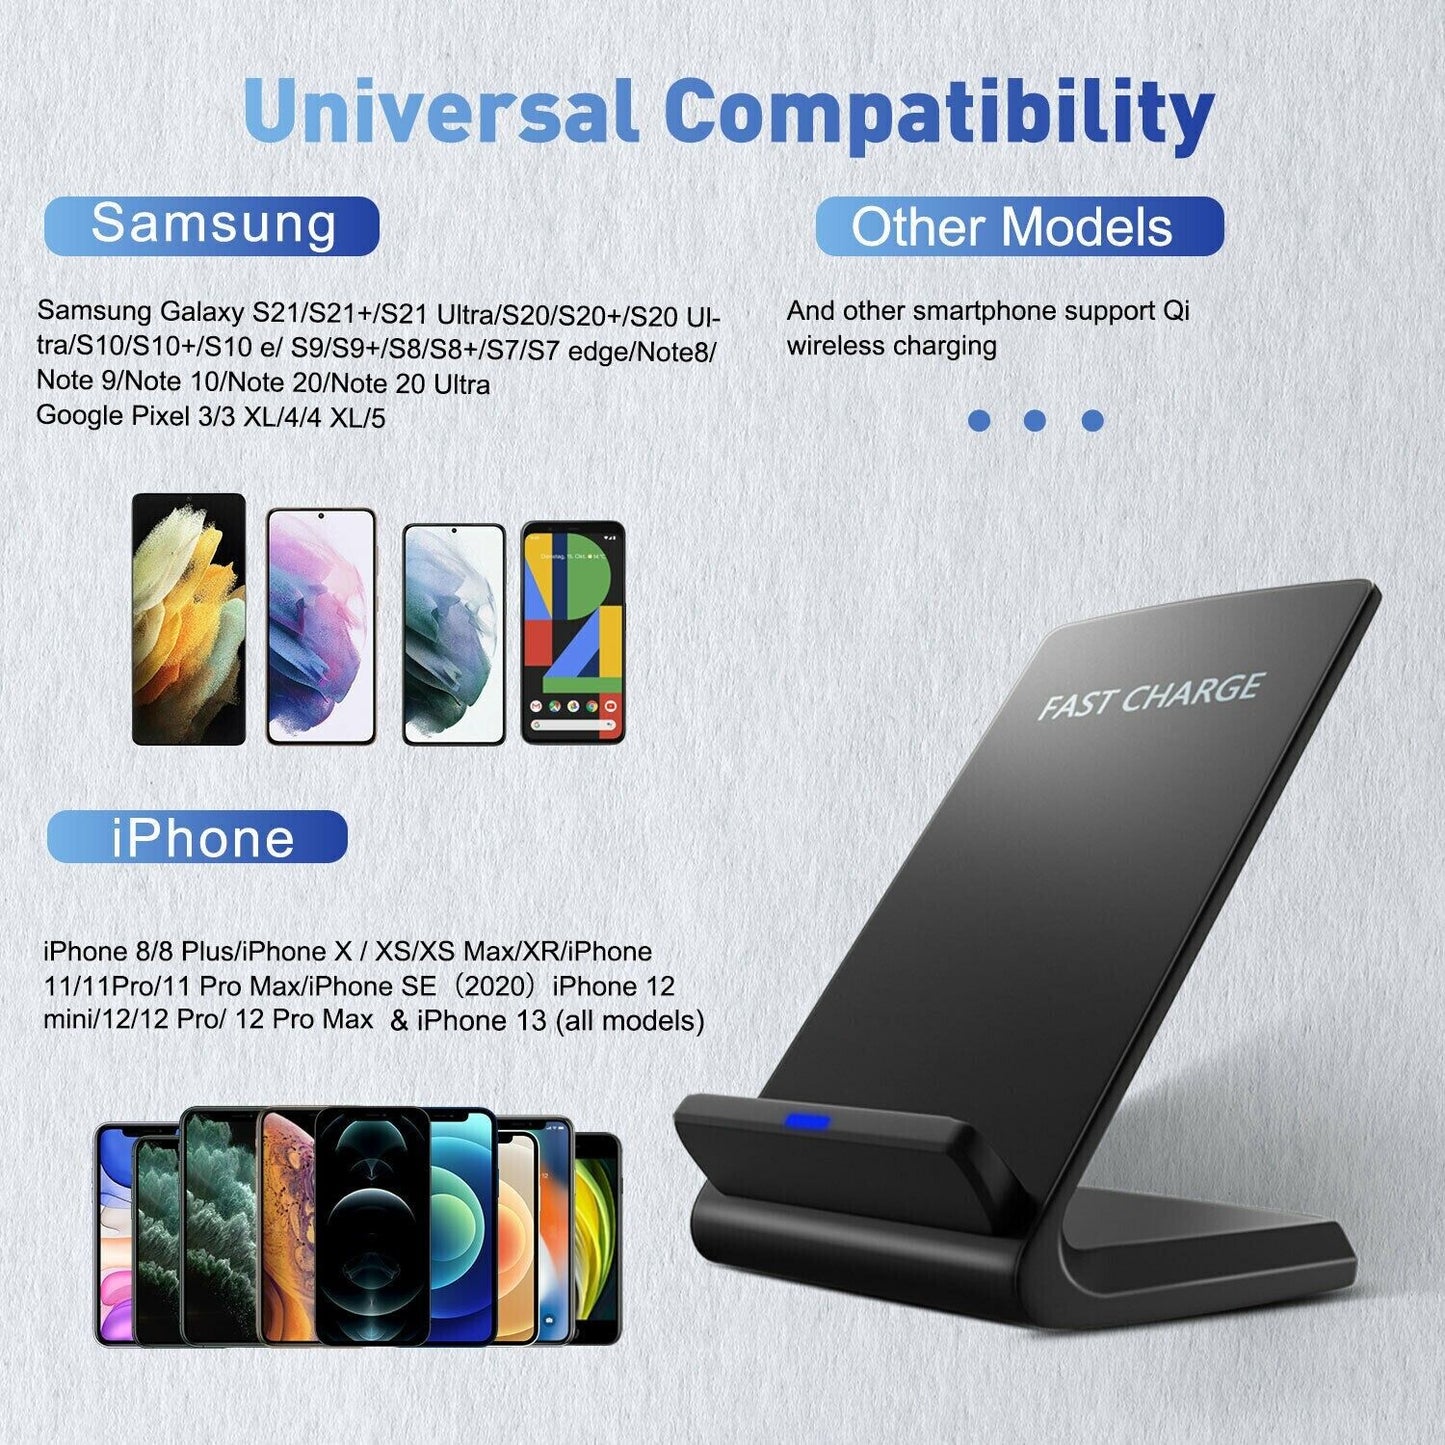 Fast Qi Wireless Charging Stand Dock Charger For Apple iPhone & Samsung Galaxy